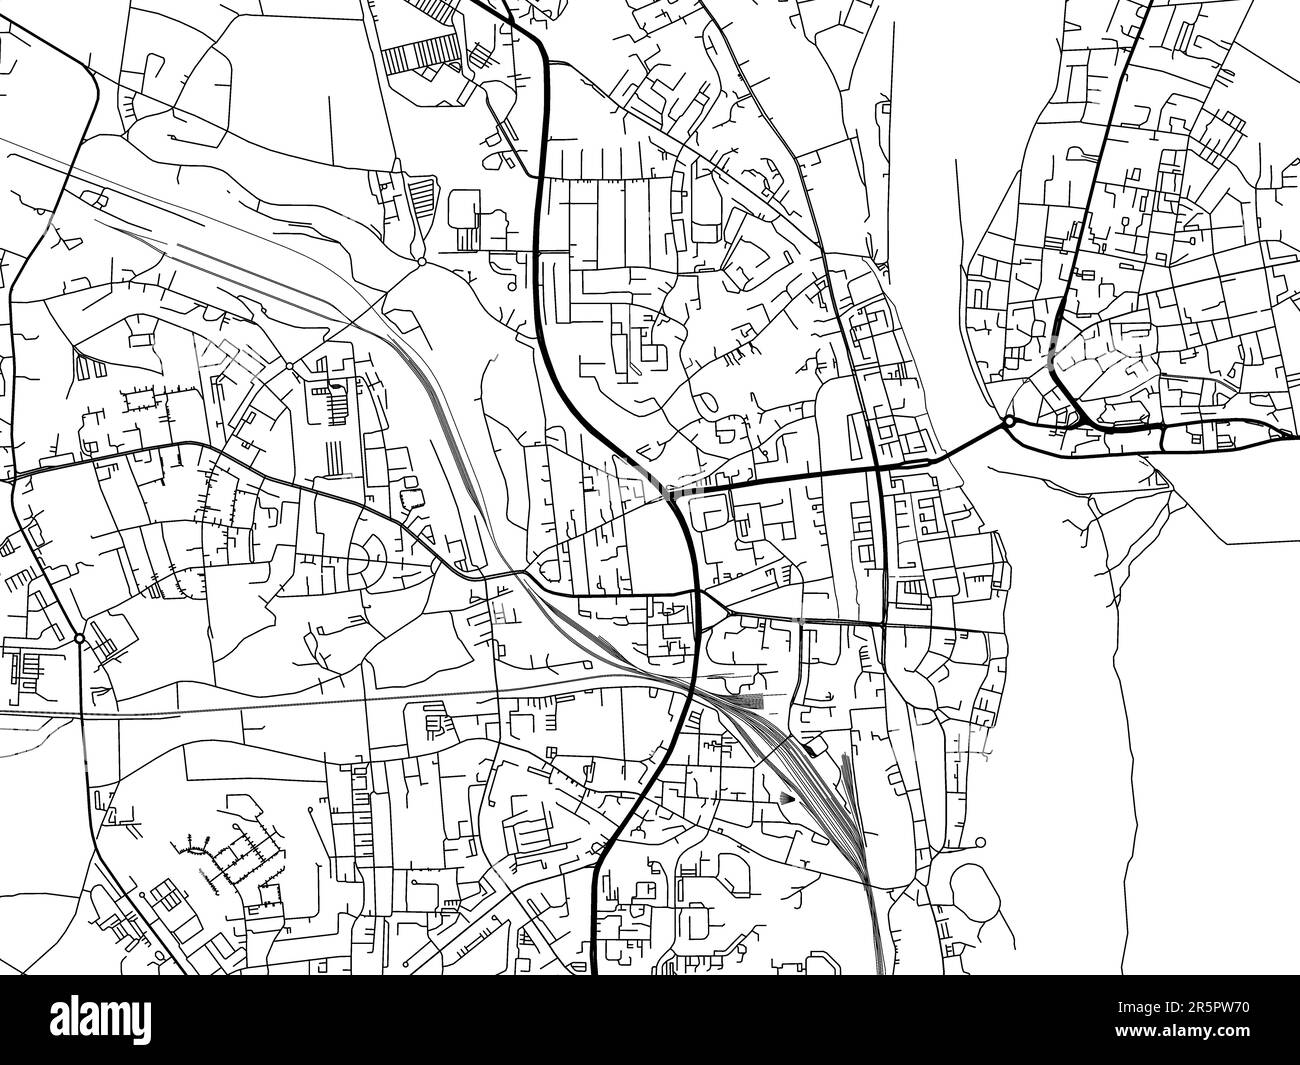 Vector road map of the city of  Frankfurt am Oder in Germany on a white background. Stock Photo